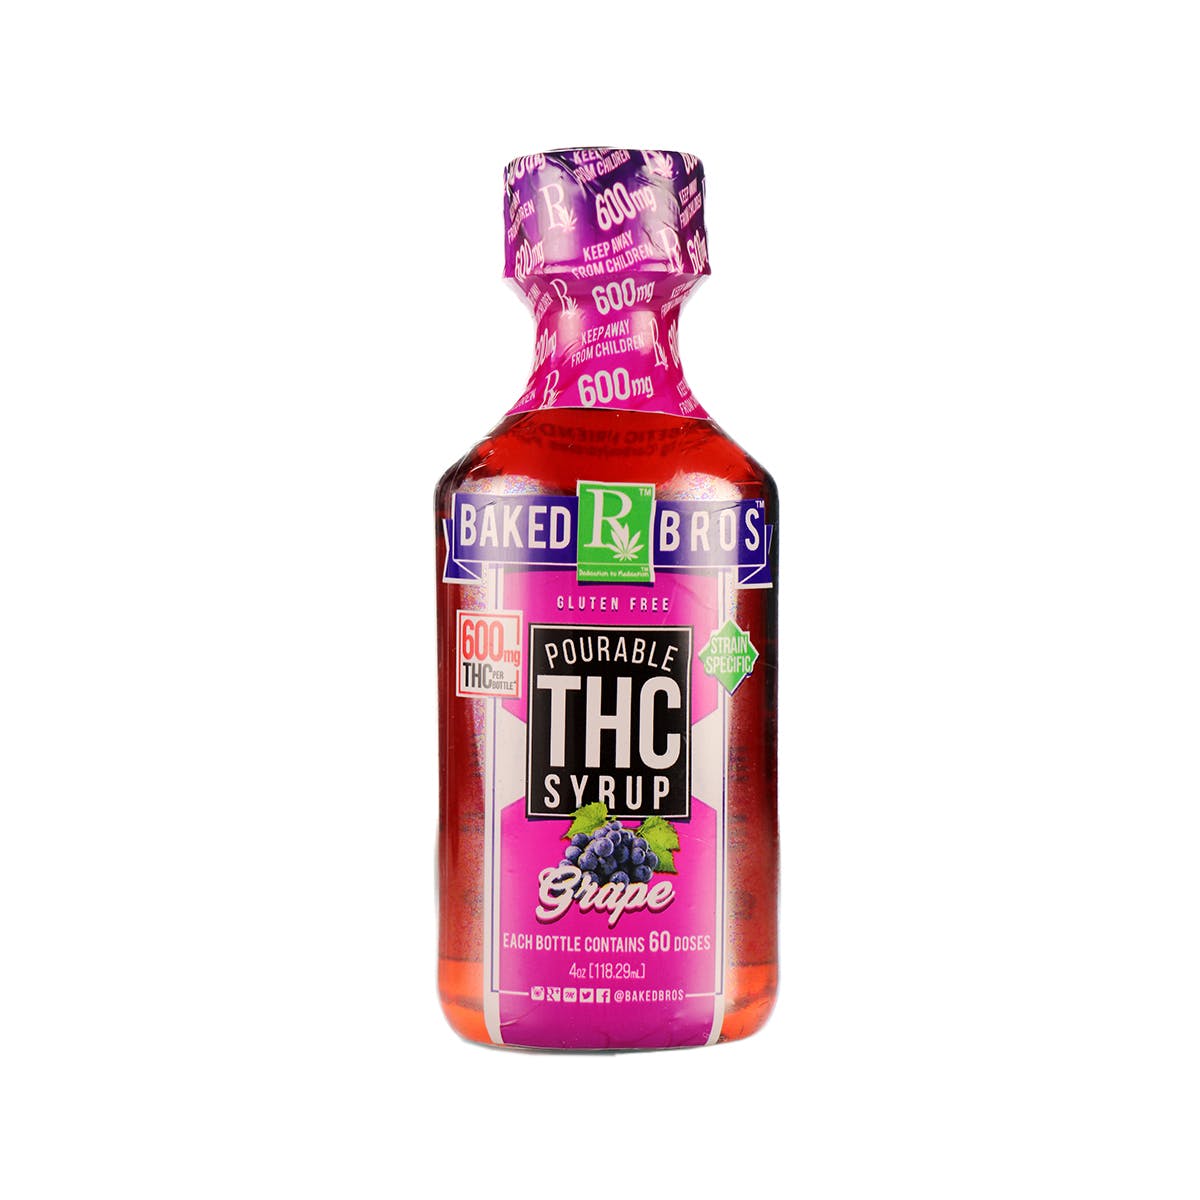 drink-baked-bros-thc-syrup-grape-600mg